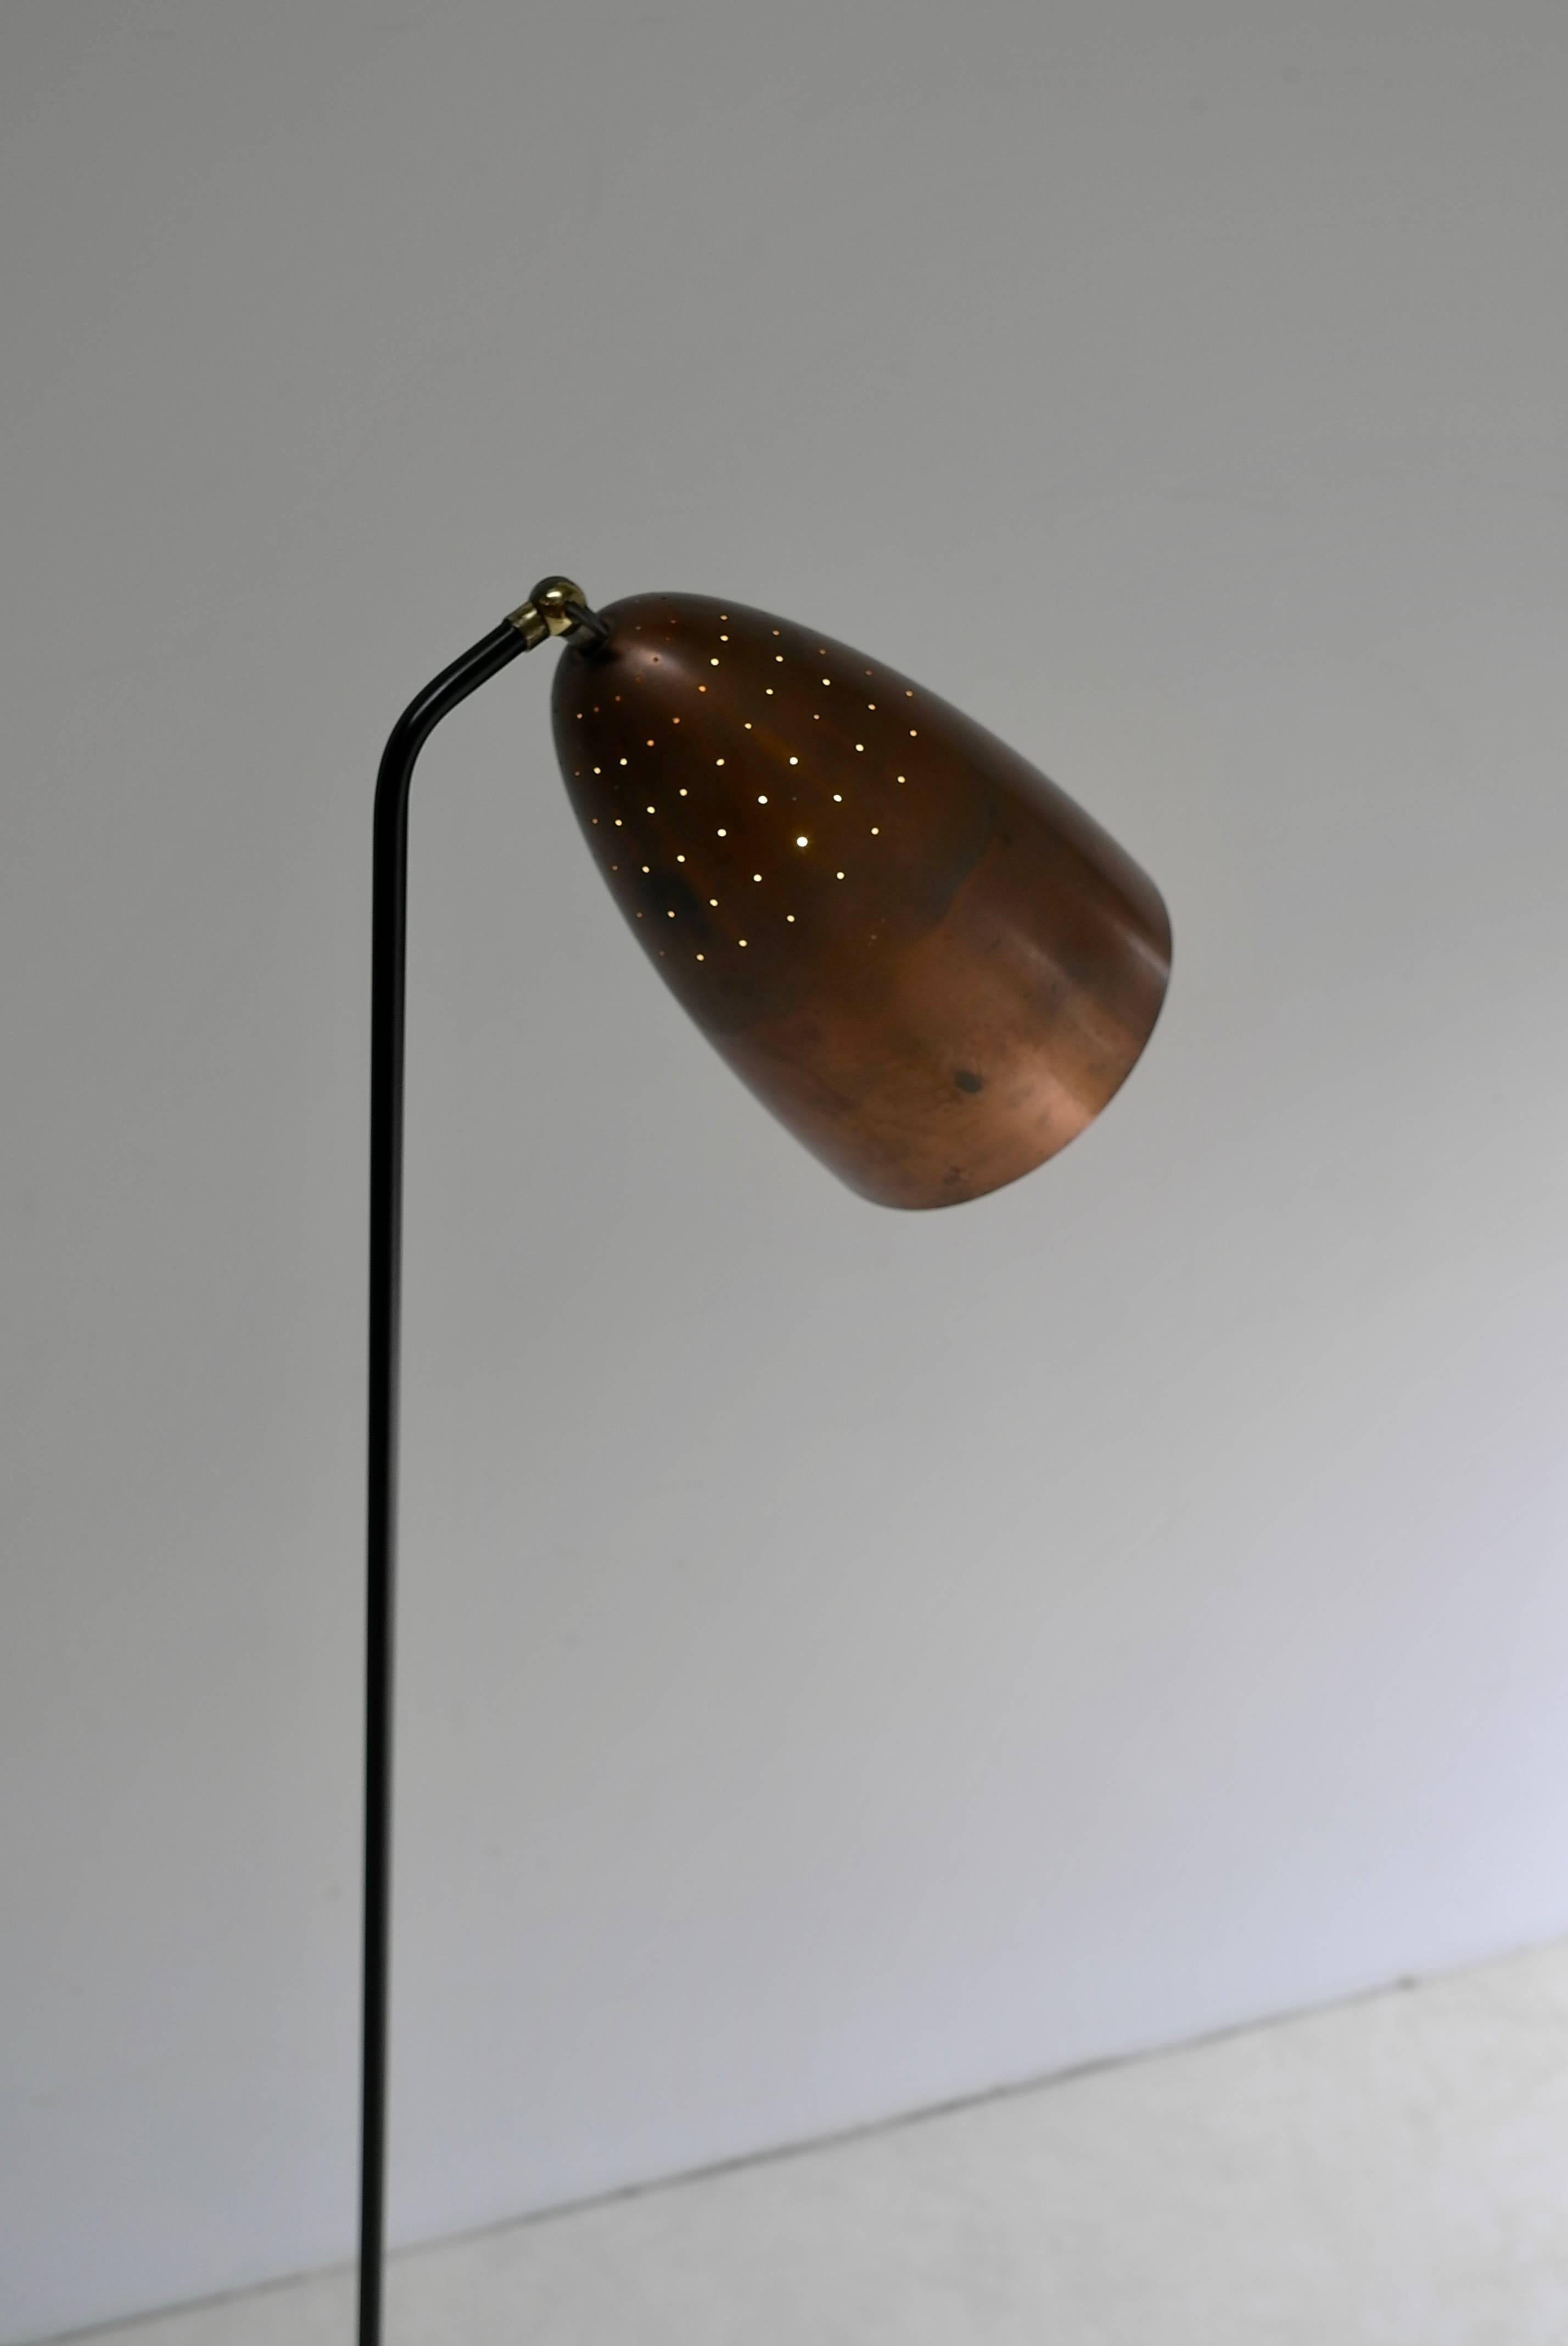 Rare copper grasshopper floor lamp by Svend Aage Holm Sorensen, Denmark, 1950s. Beautiful light shines through the many tiny holes in the copper hood. The ends from the metal base are made from brass.